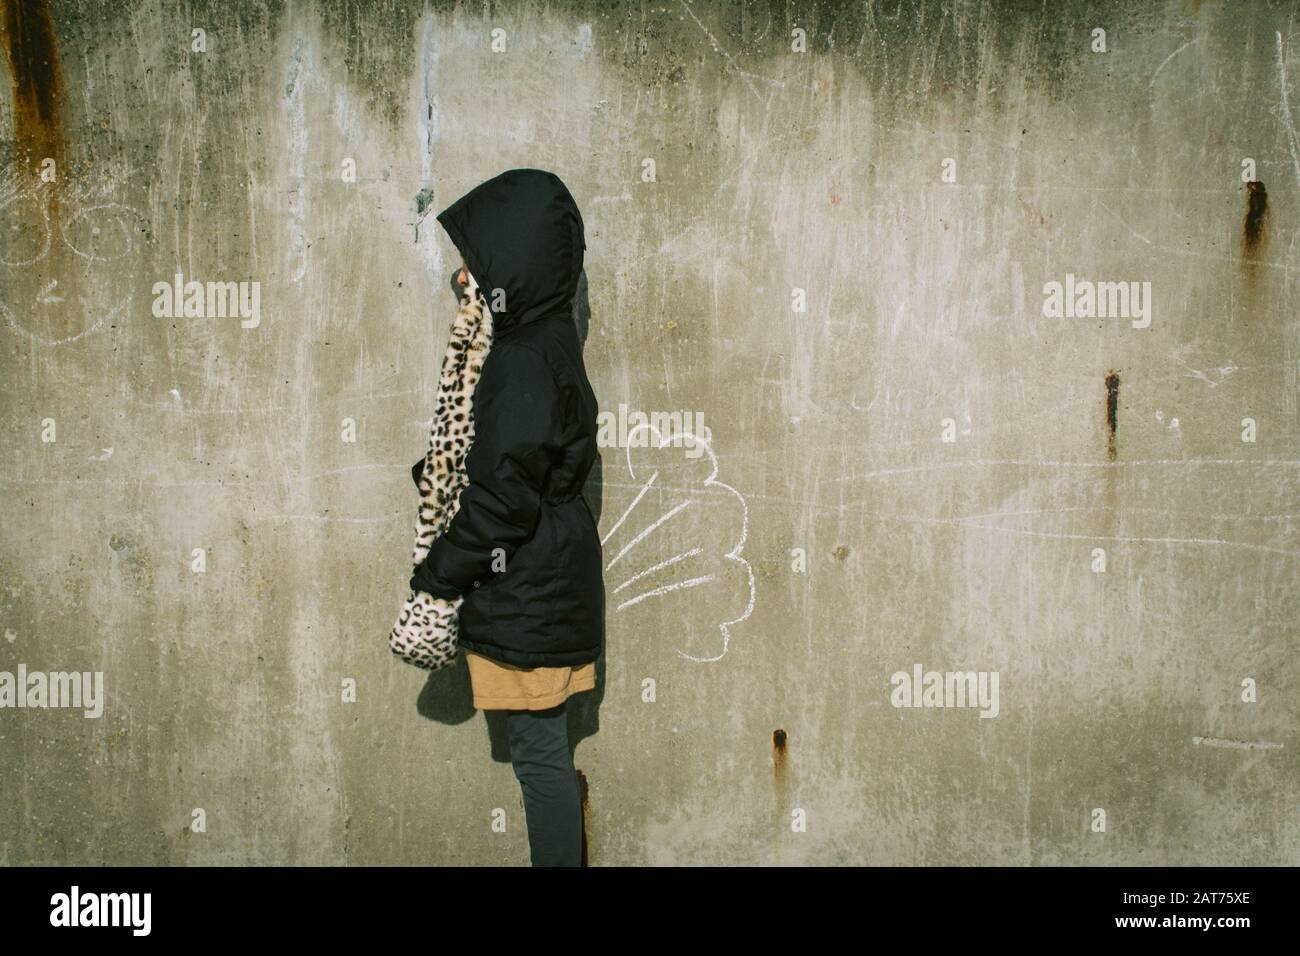 Person with a black coat standing in front of an old painted wall Stock Photo